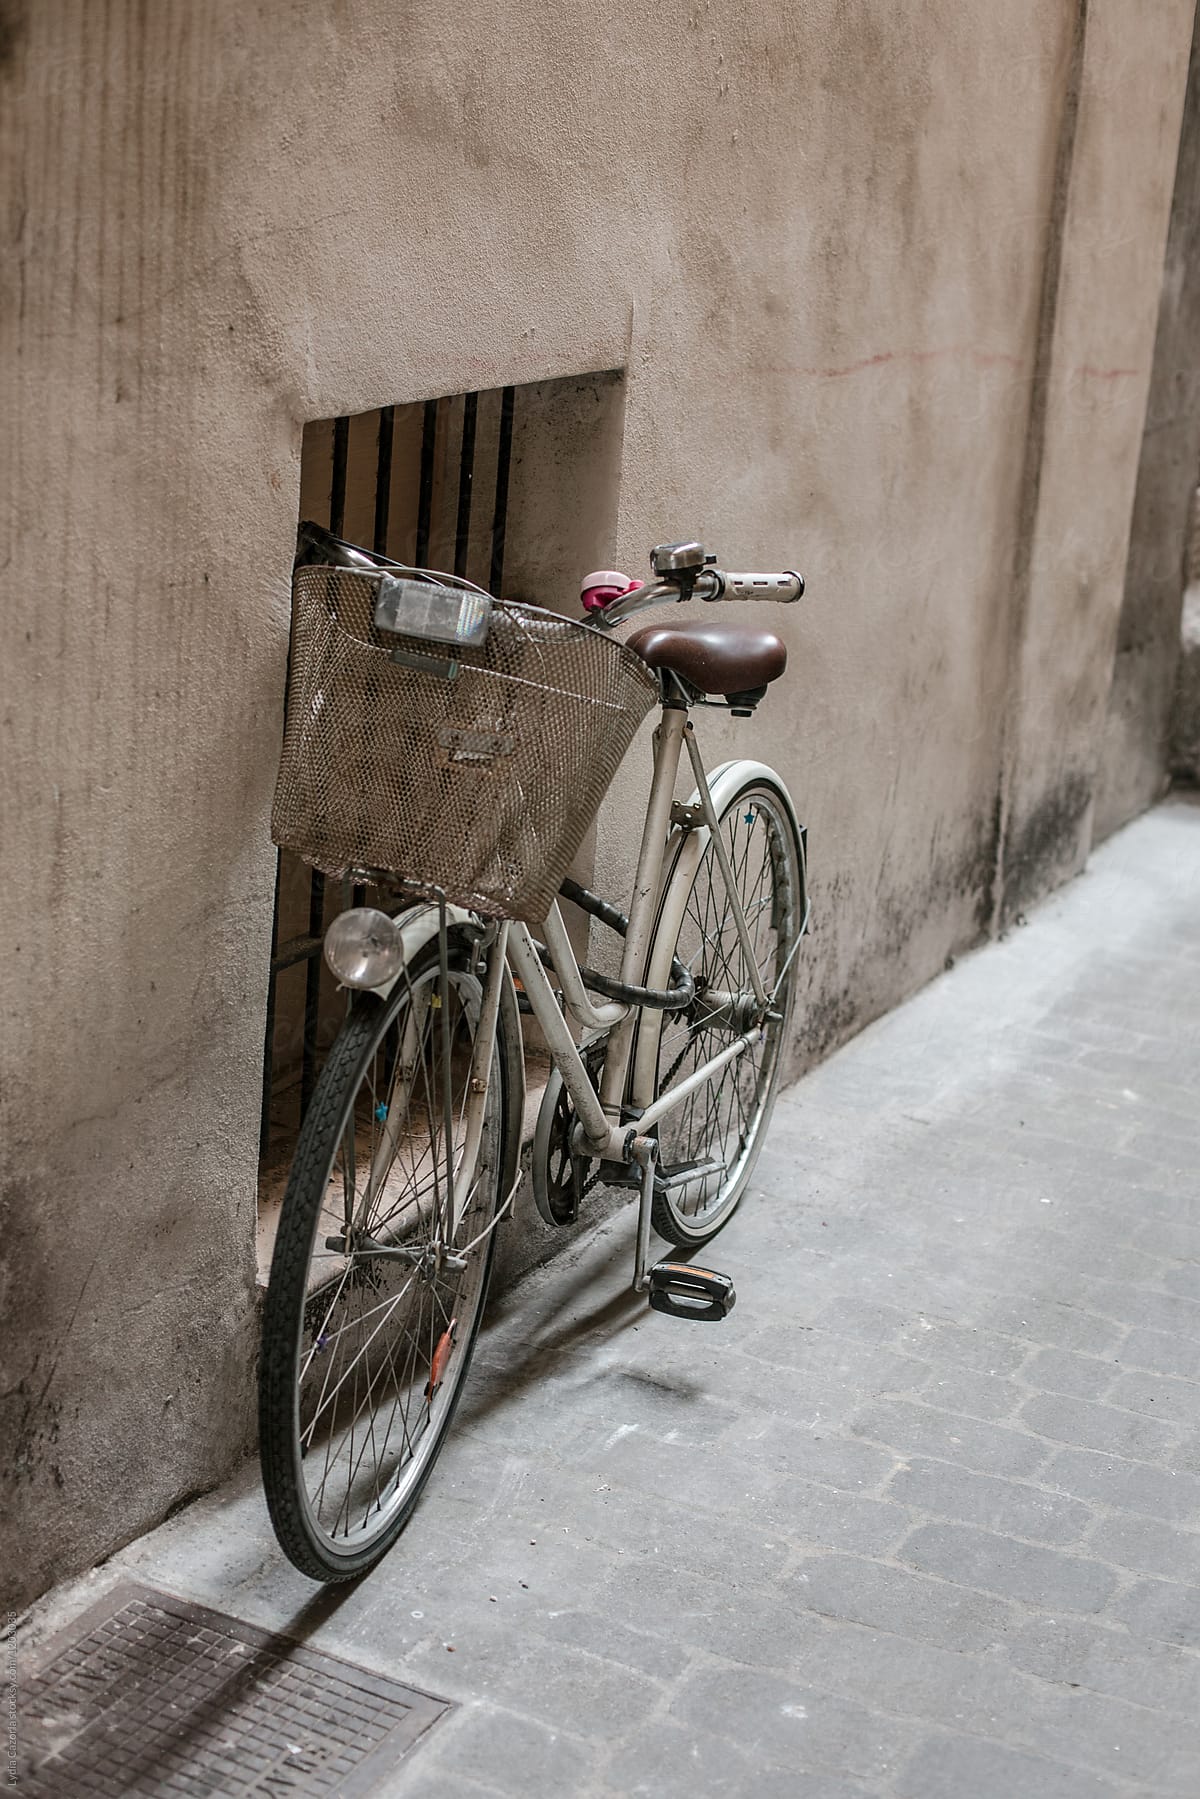 Vintage bicycle parked in a narrow street